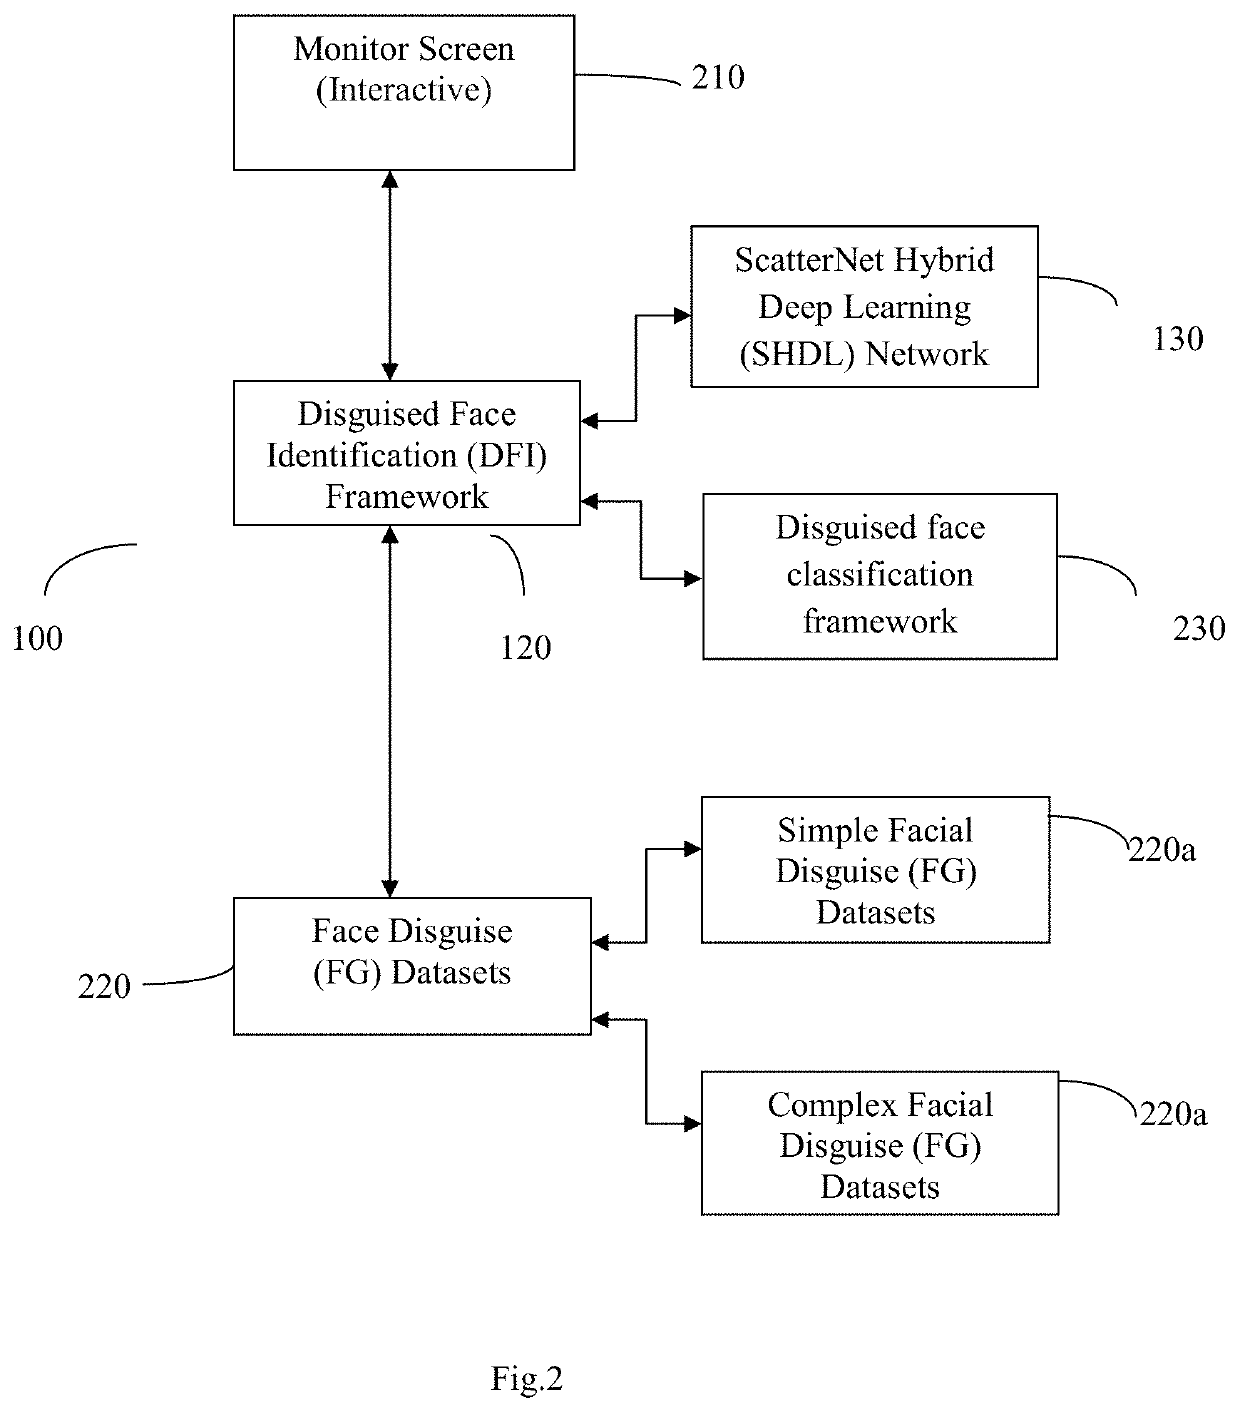 Continuously Evolving and Interactive Disguised Face Identification (DFI) with Facial Key Points using ScatterNet Hybrid Deep Learning (SHDL) Network